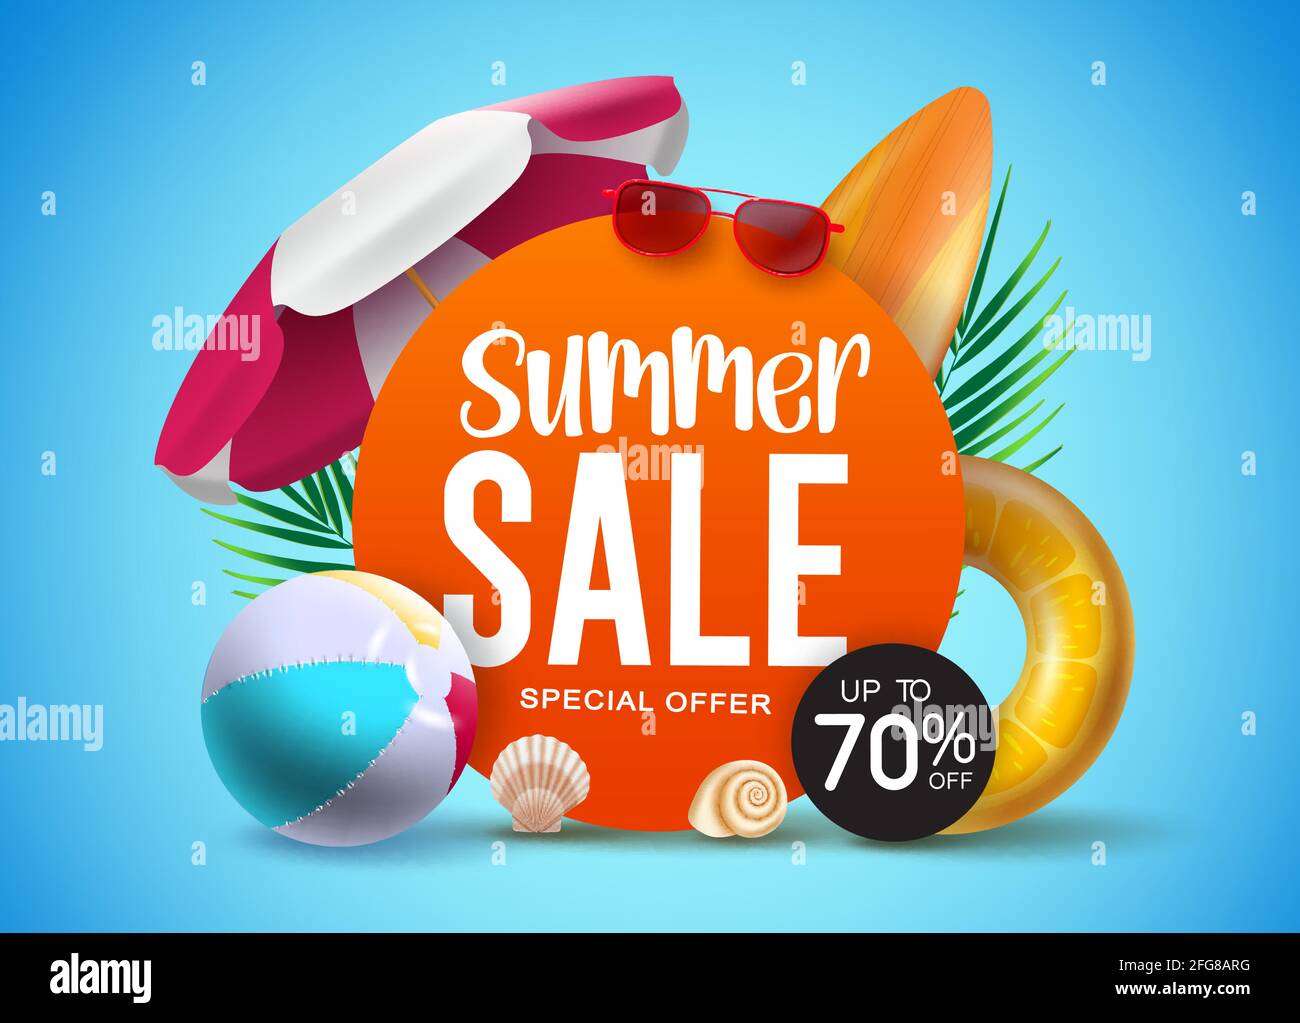 Summer sale vector banner template. Summer sale special offer text with up to 70% off beach element like beach ball, floater and sunglasses. Stock Vector